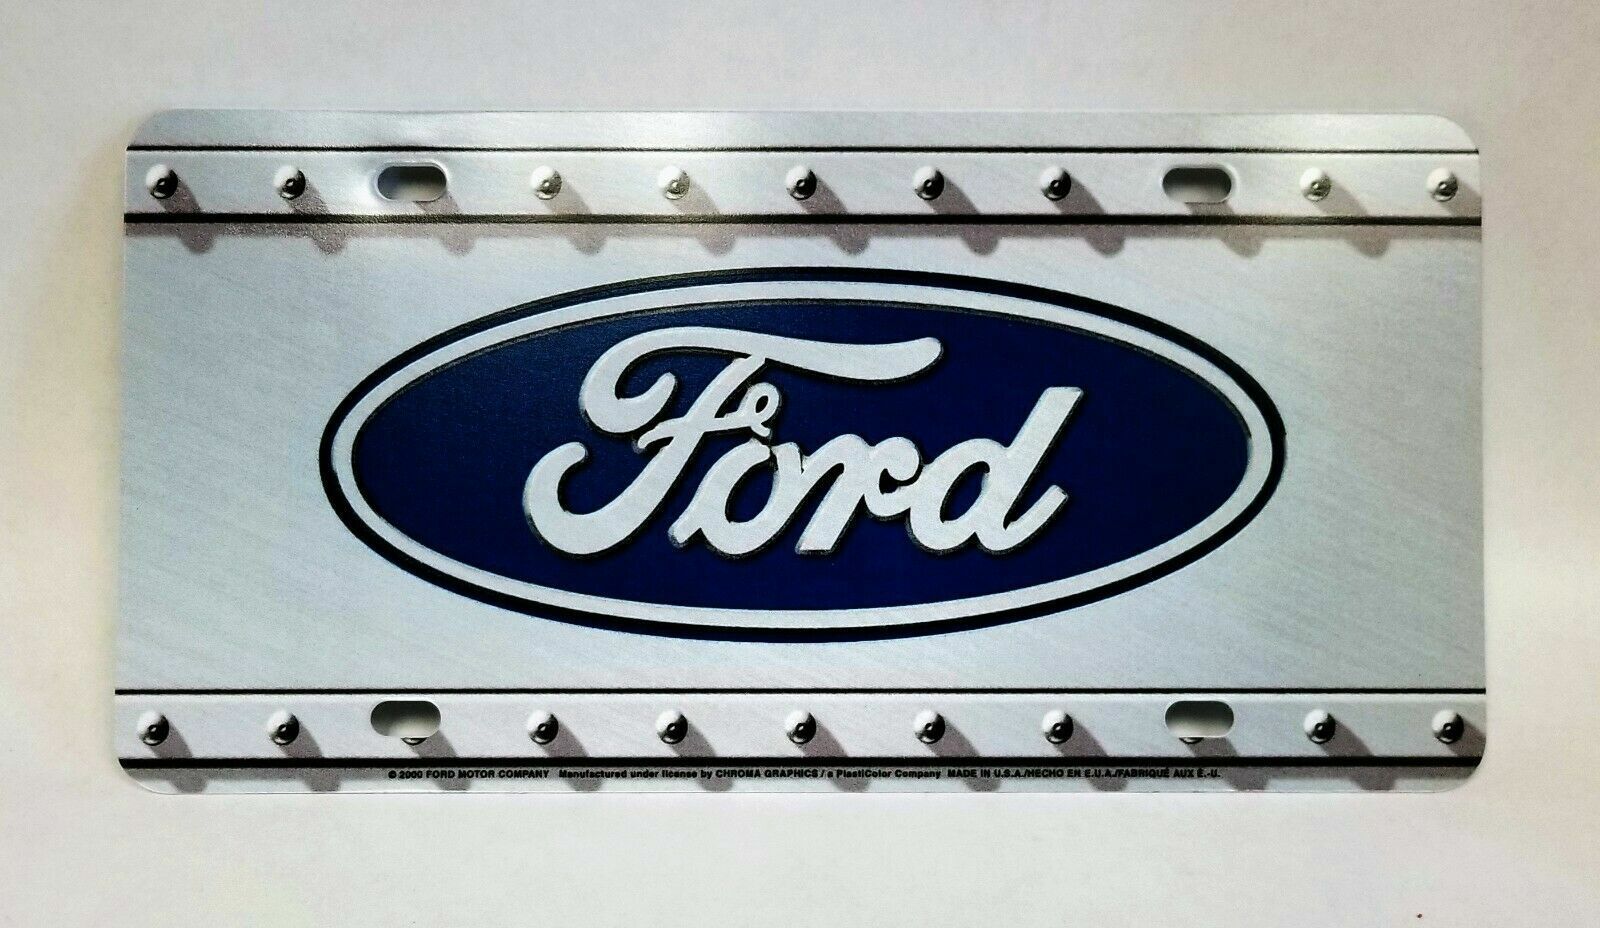 FORD Logo - Acrylic Novelty Gift License Plate for Car or Truck 